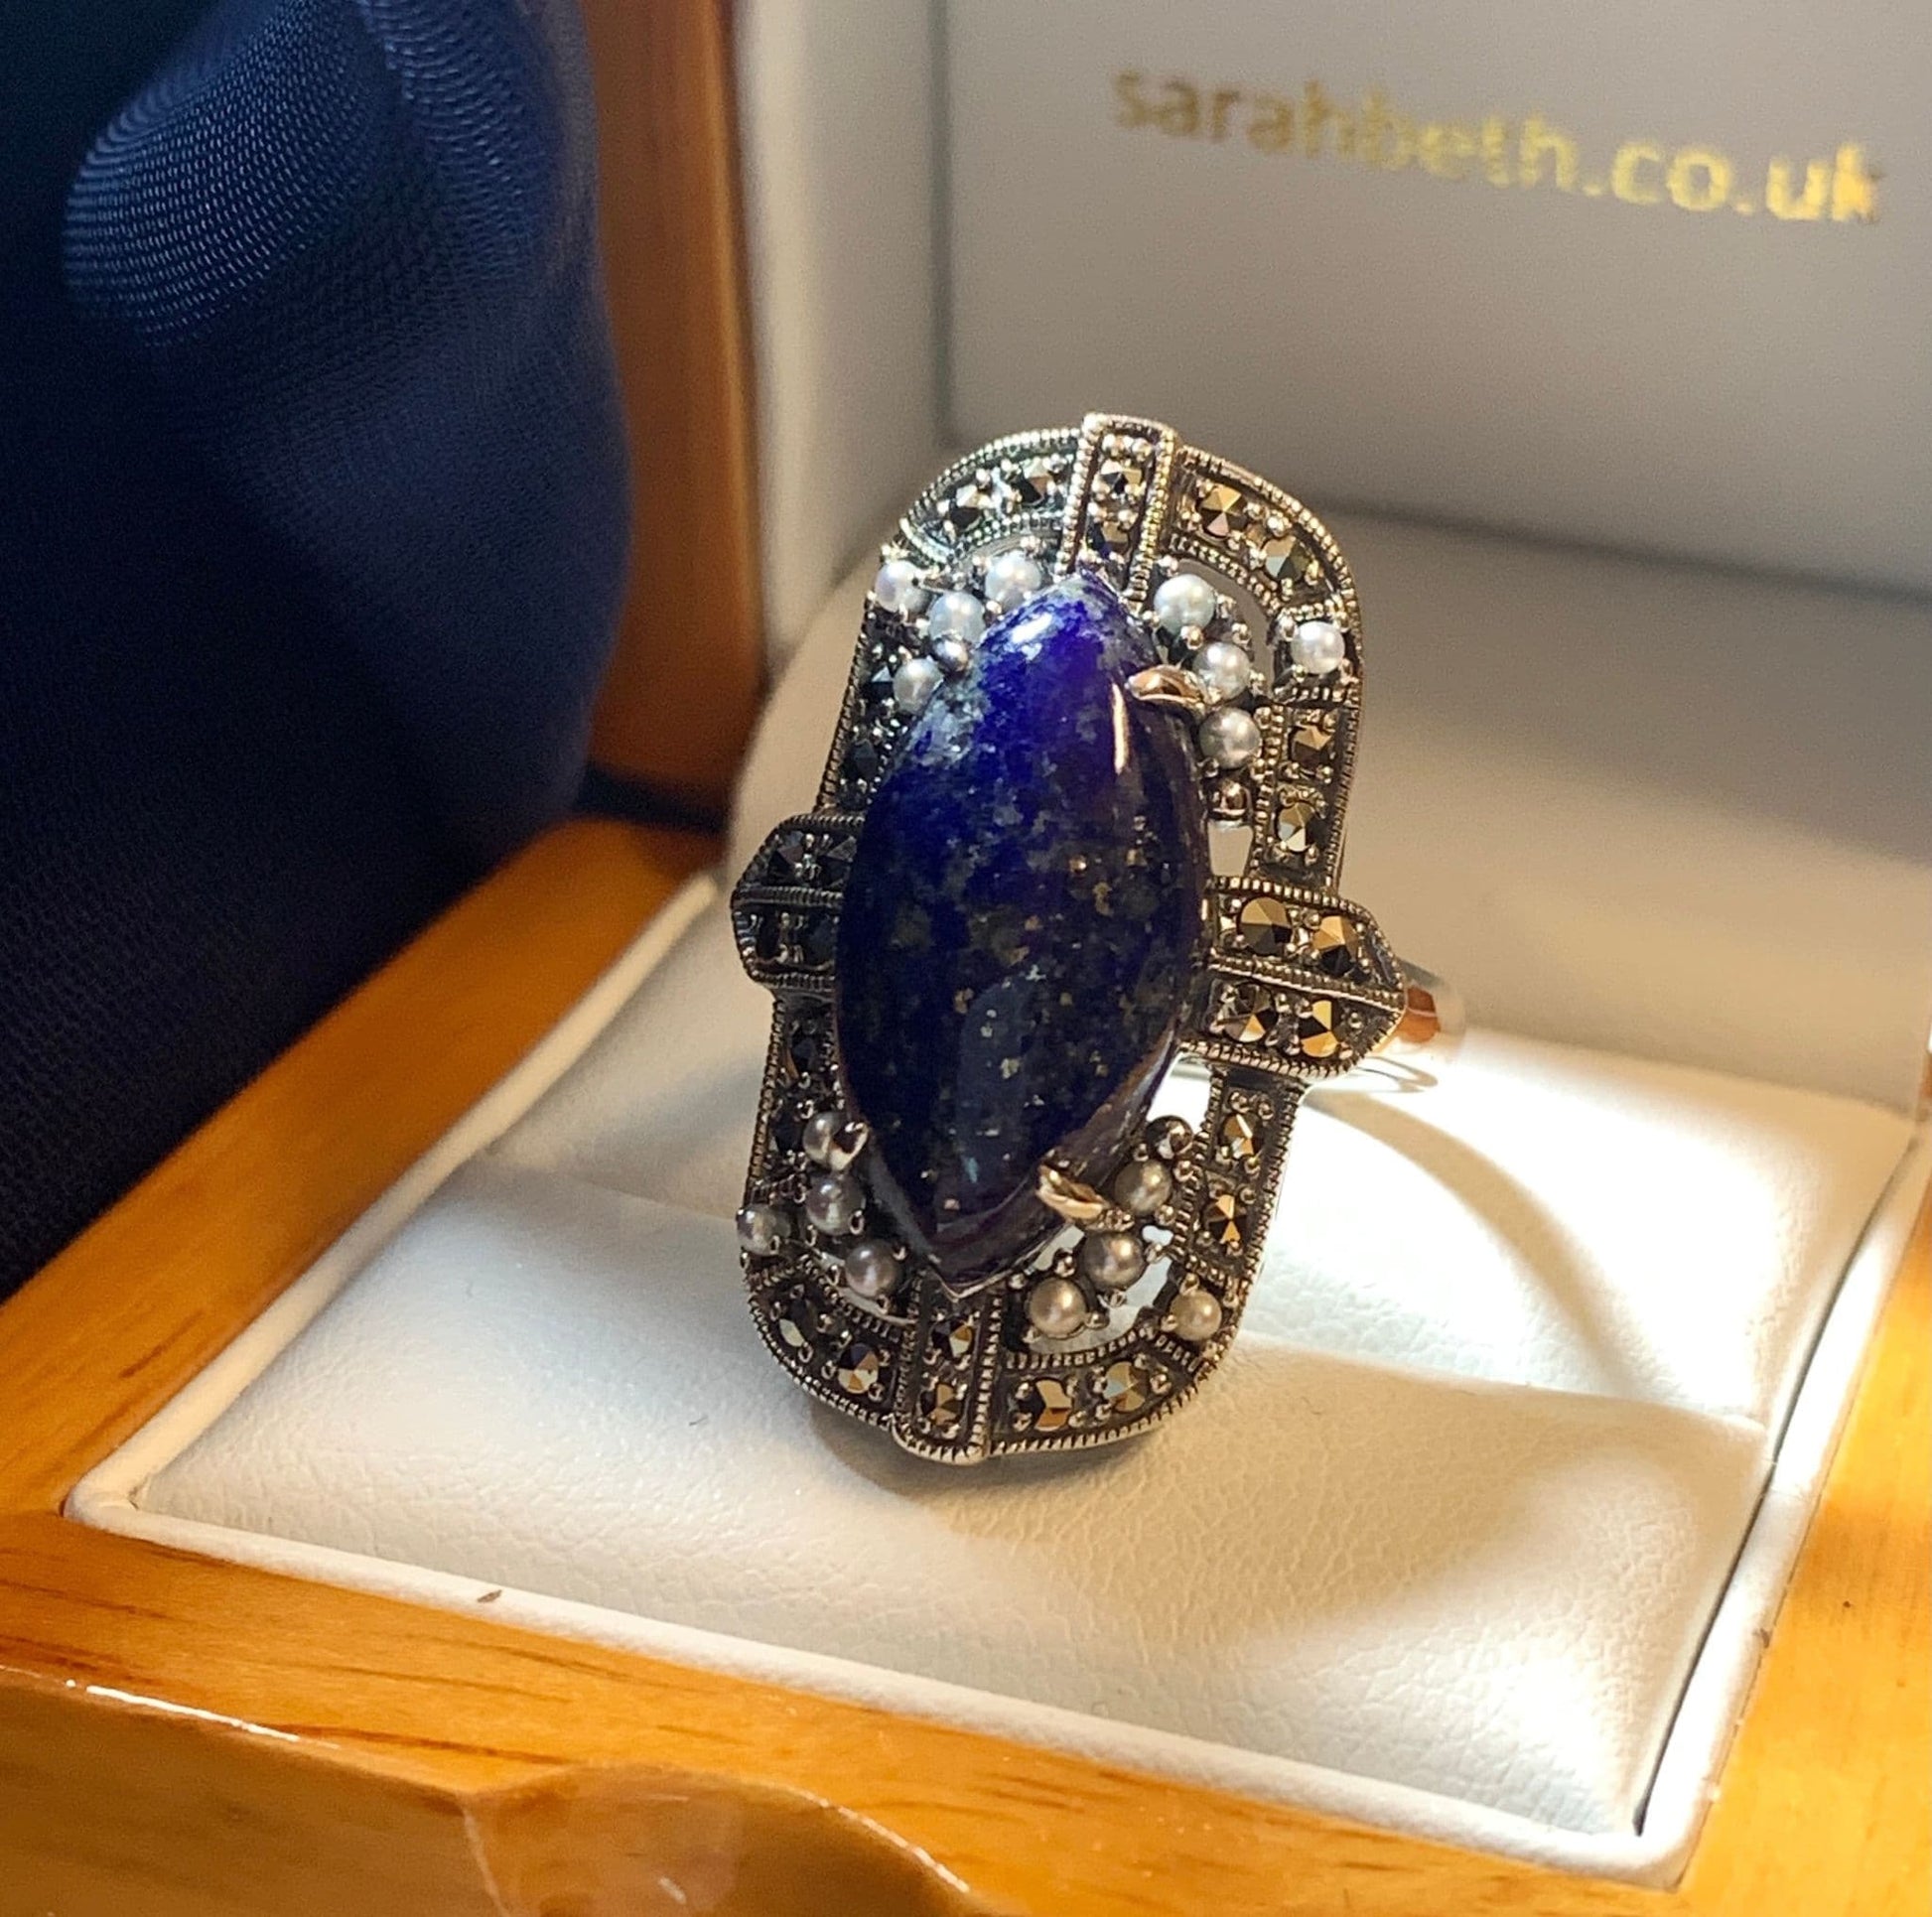 Large oval with blue marquise lapis lazuli sterling silver ladies cocktail dress ring